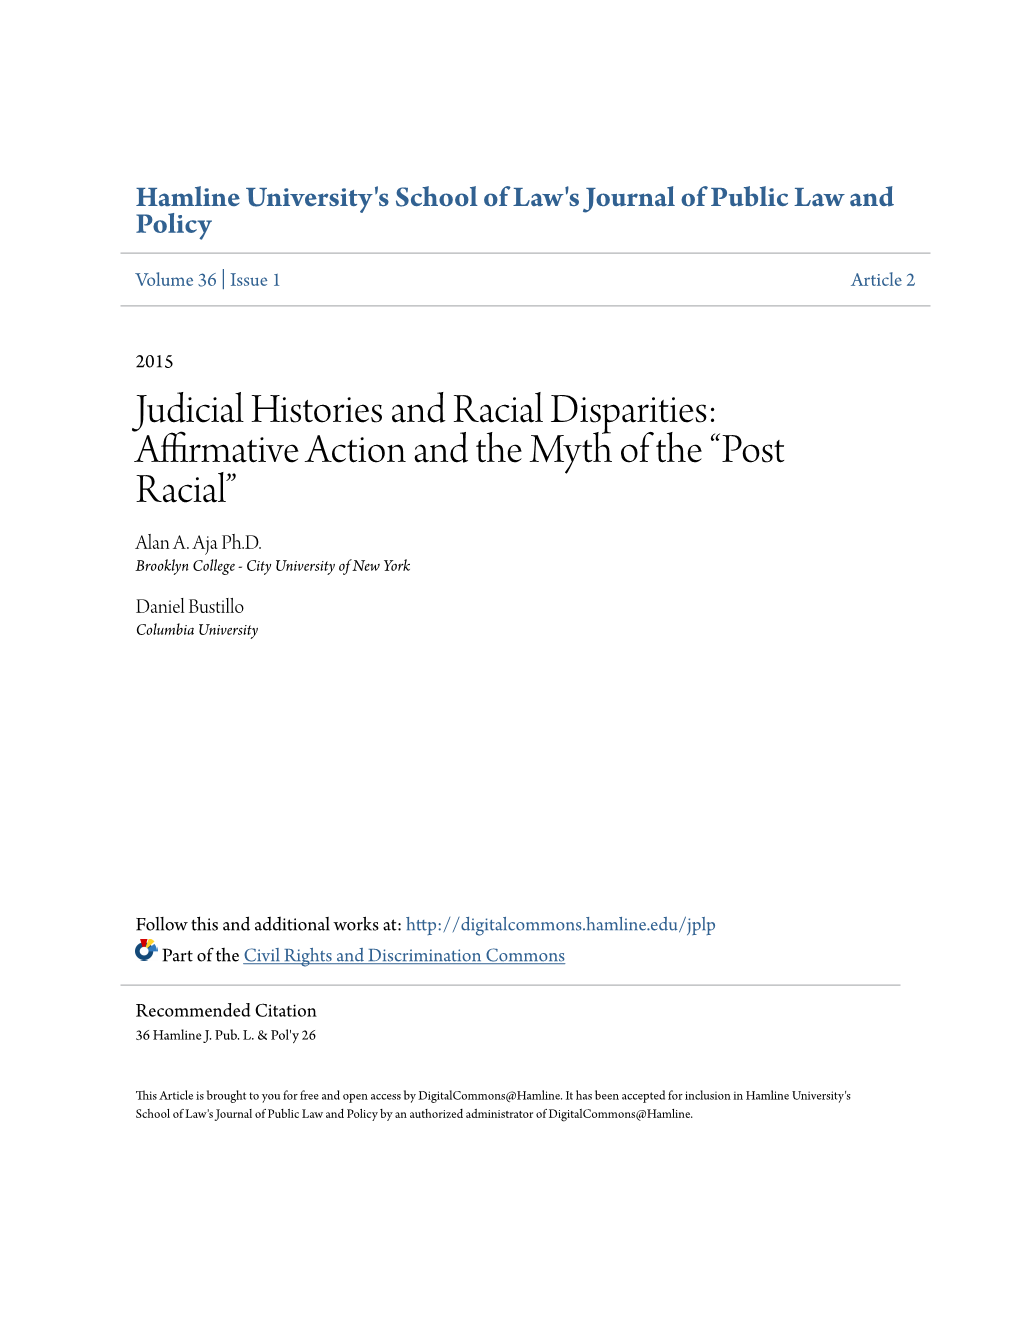 Judicial Histories and Racial Disparities: Affirmative Action and the Myth of the “Post Racial” Alan A